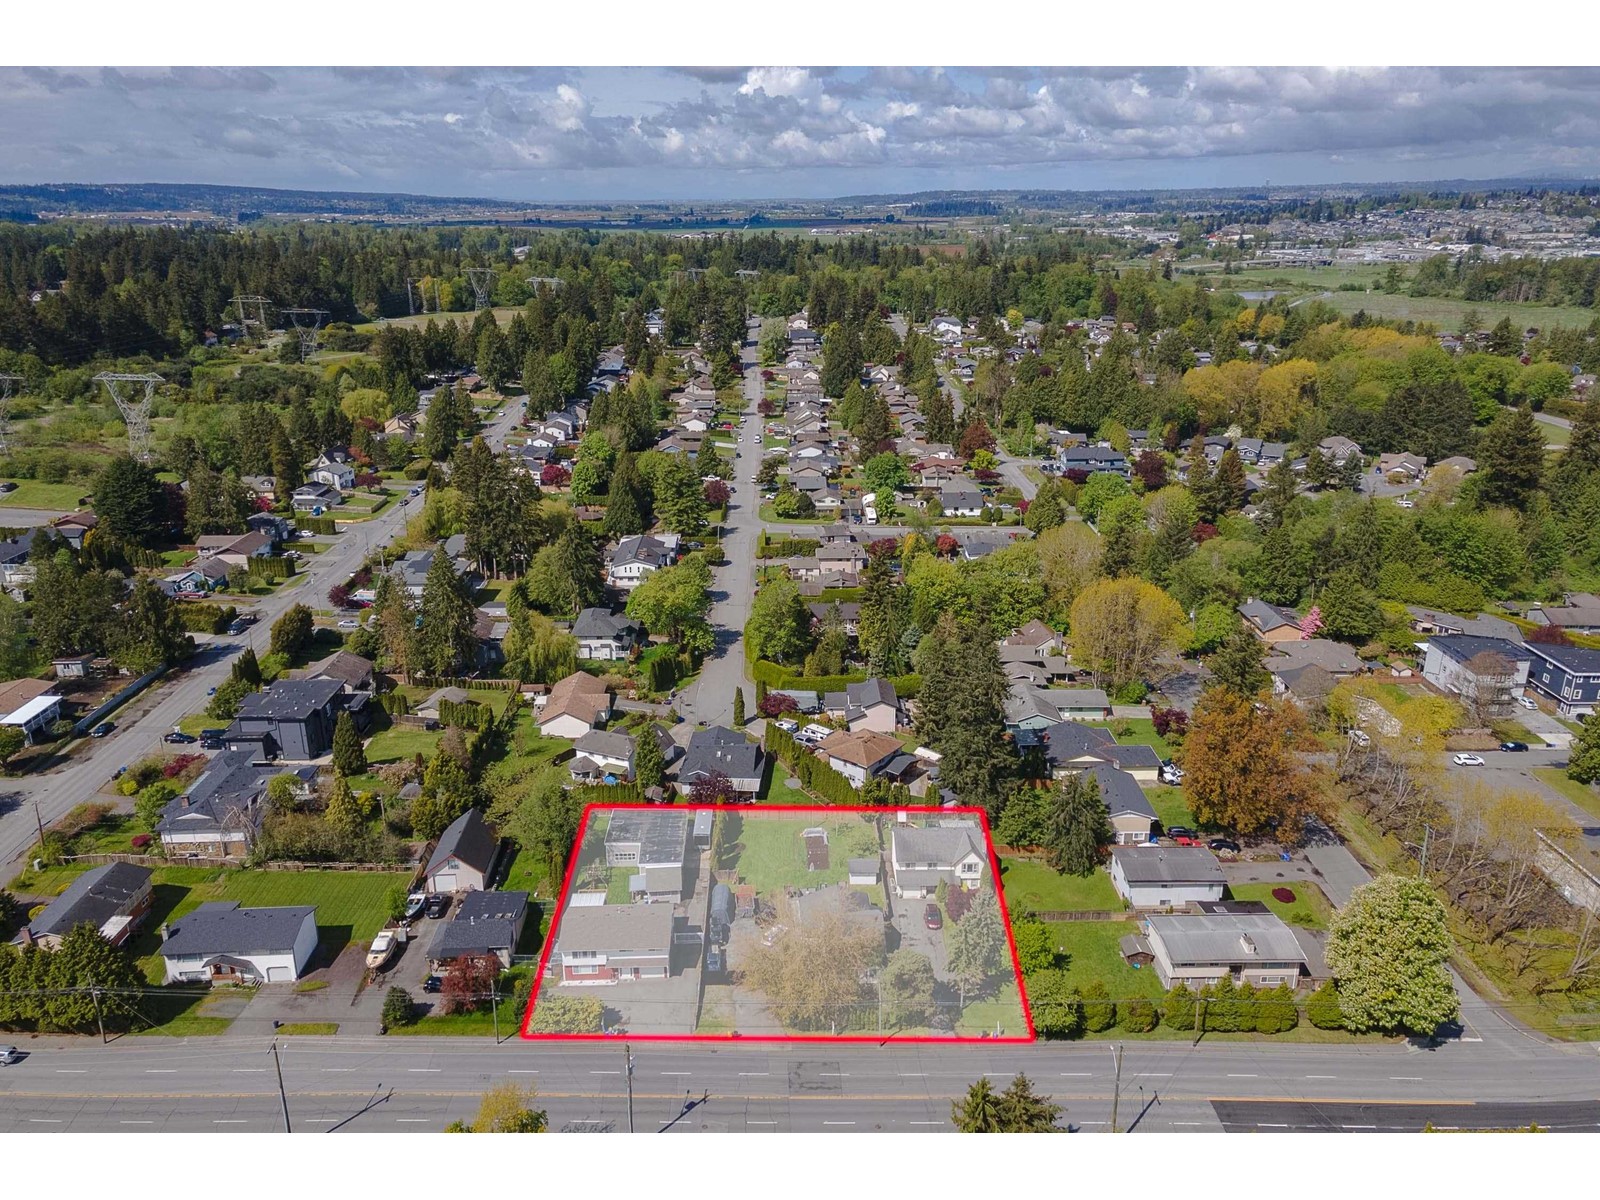 4875 200 STREET located in Langley, British Columbia